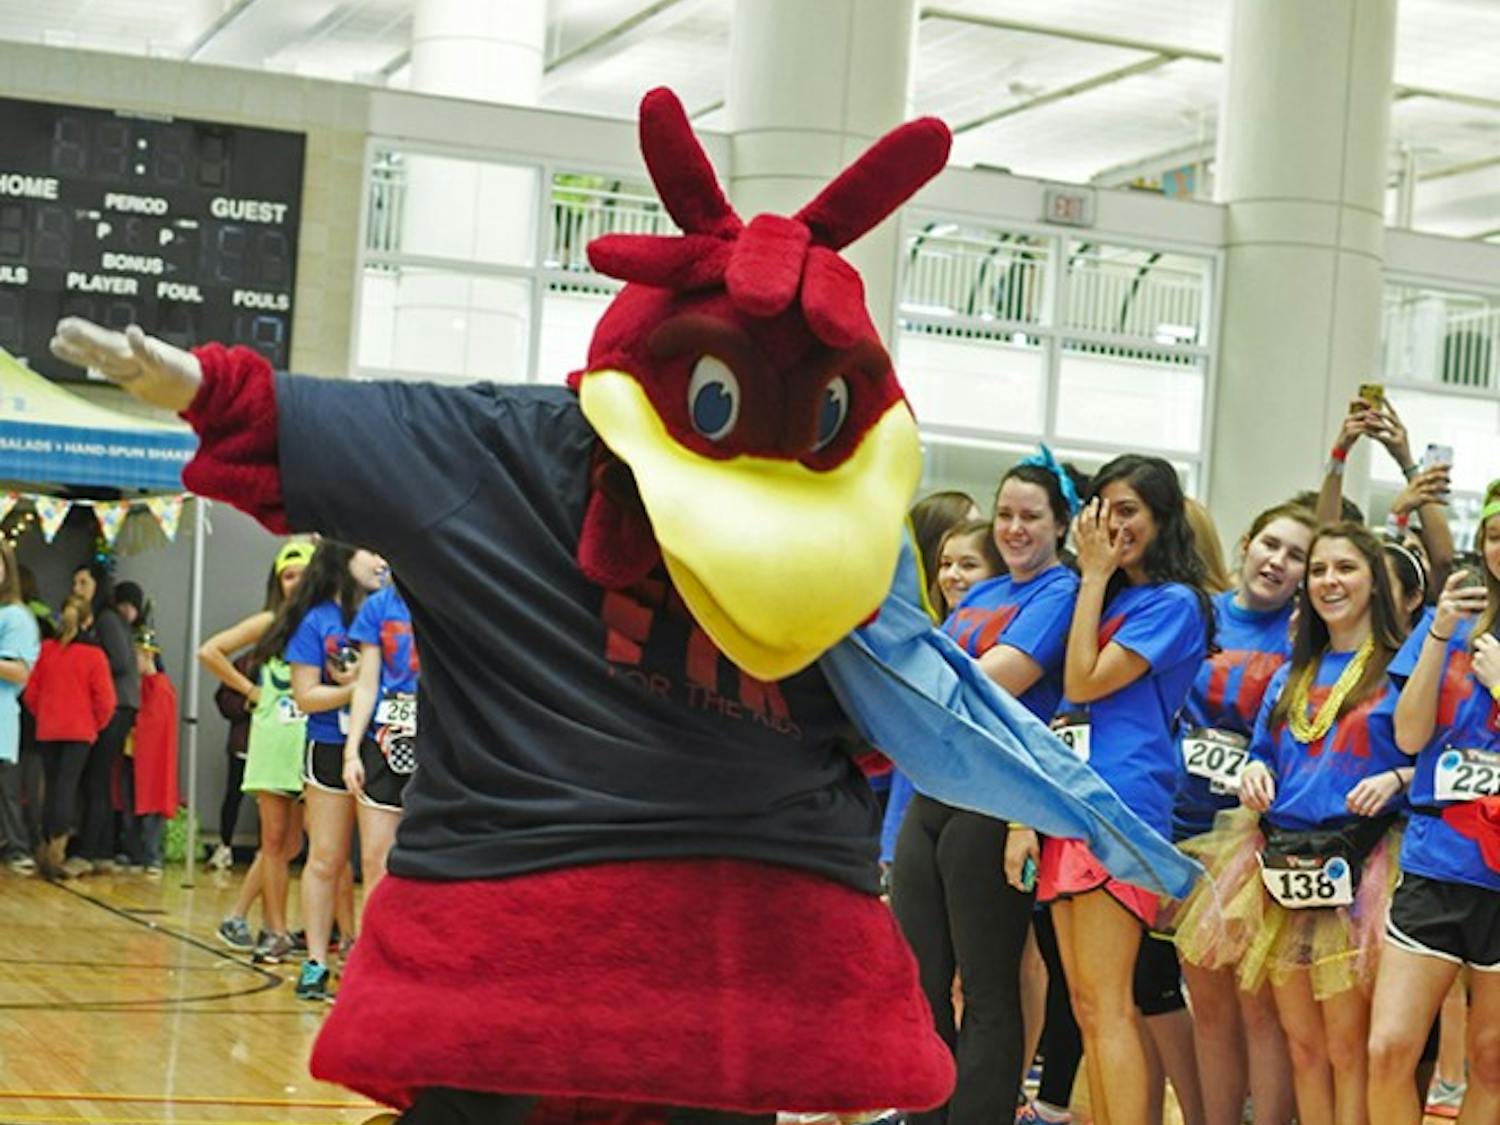 	Cocky got the crowd going, showing off his moves while everyone waited for Dance Marathon to begin.
Brian Almond/The Daily Gamecock